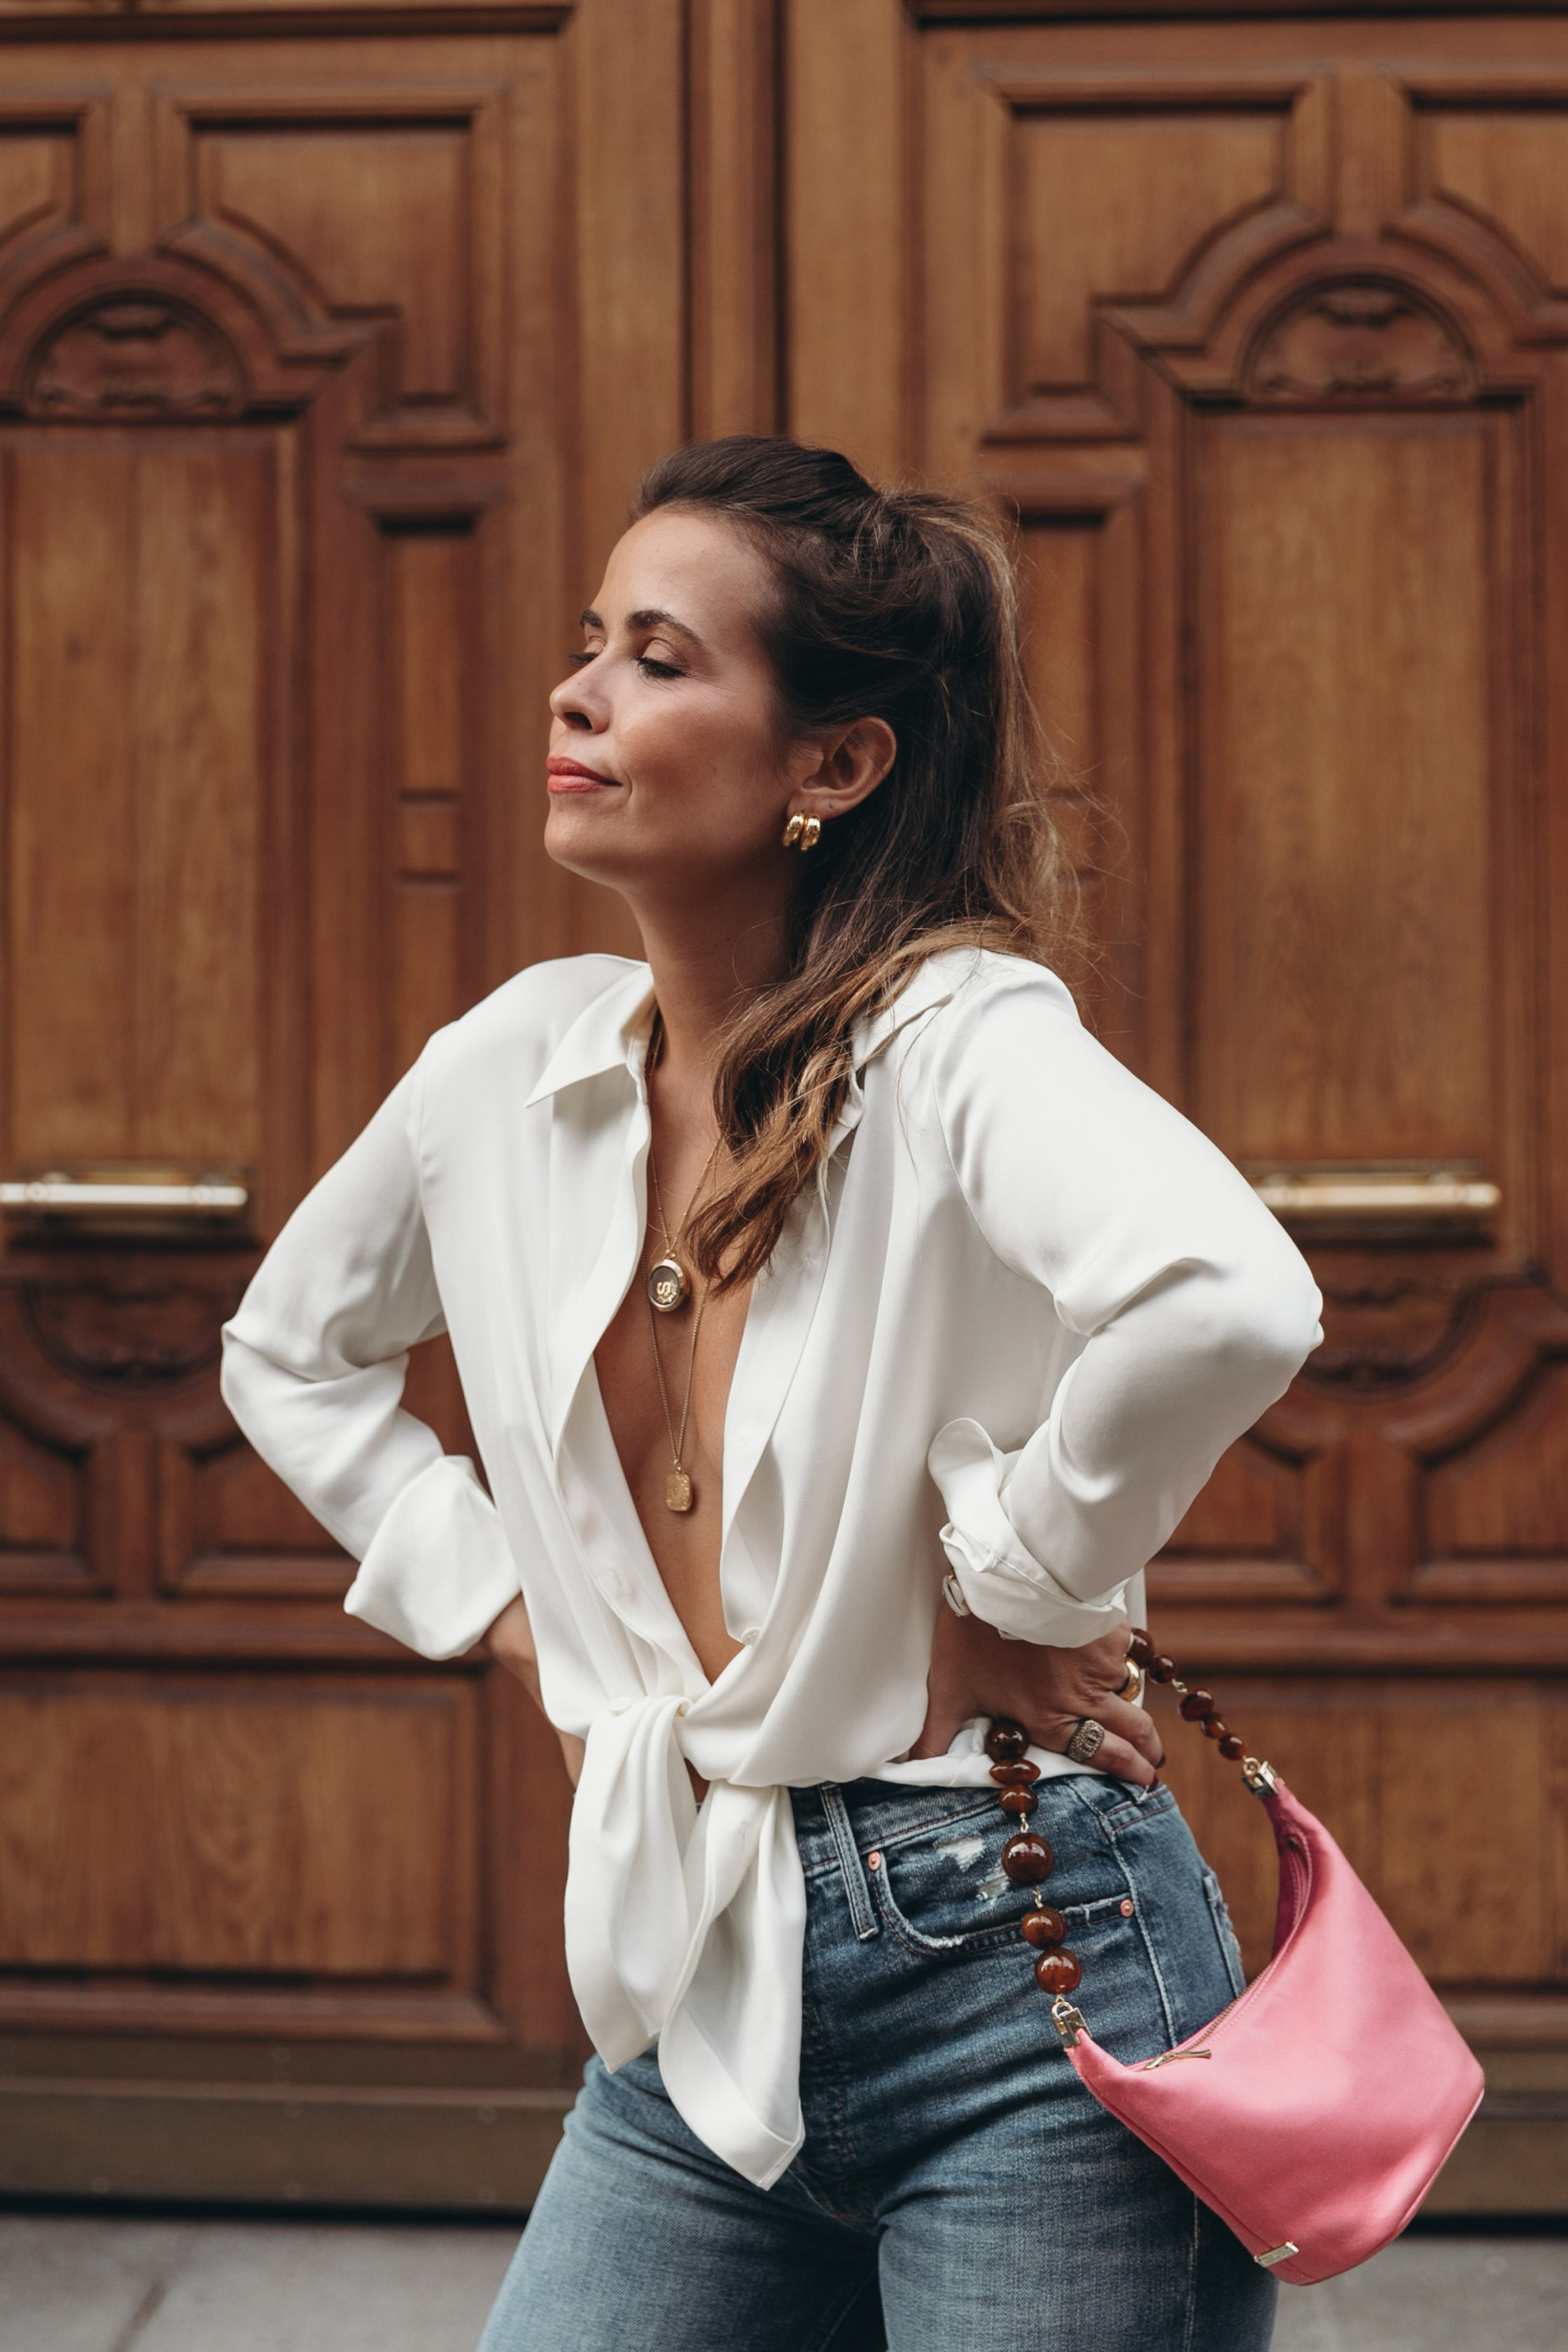 The perfect White Blouse